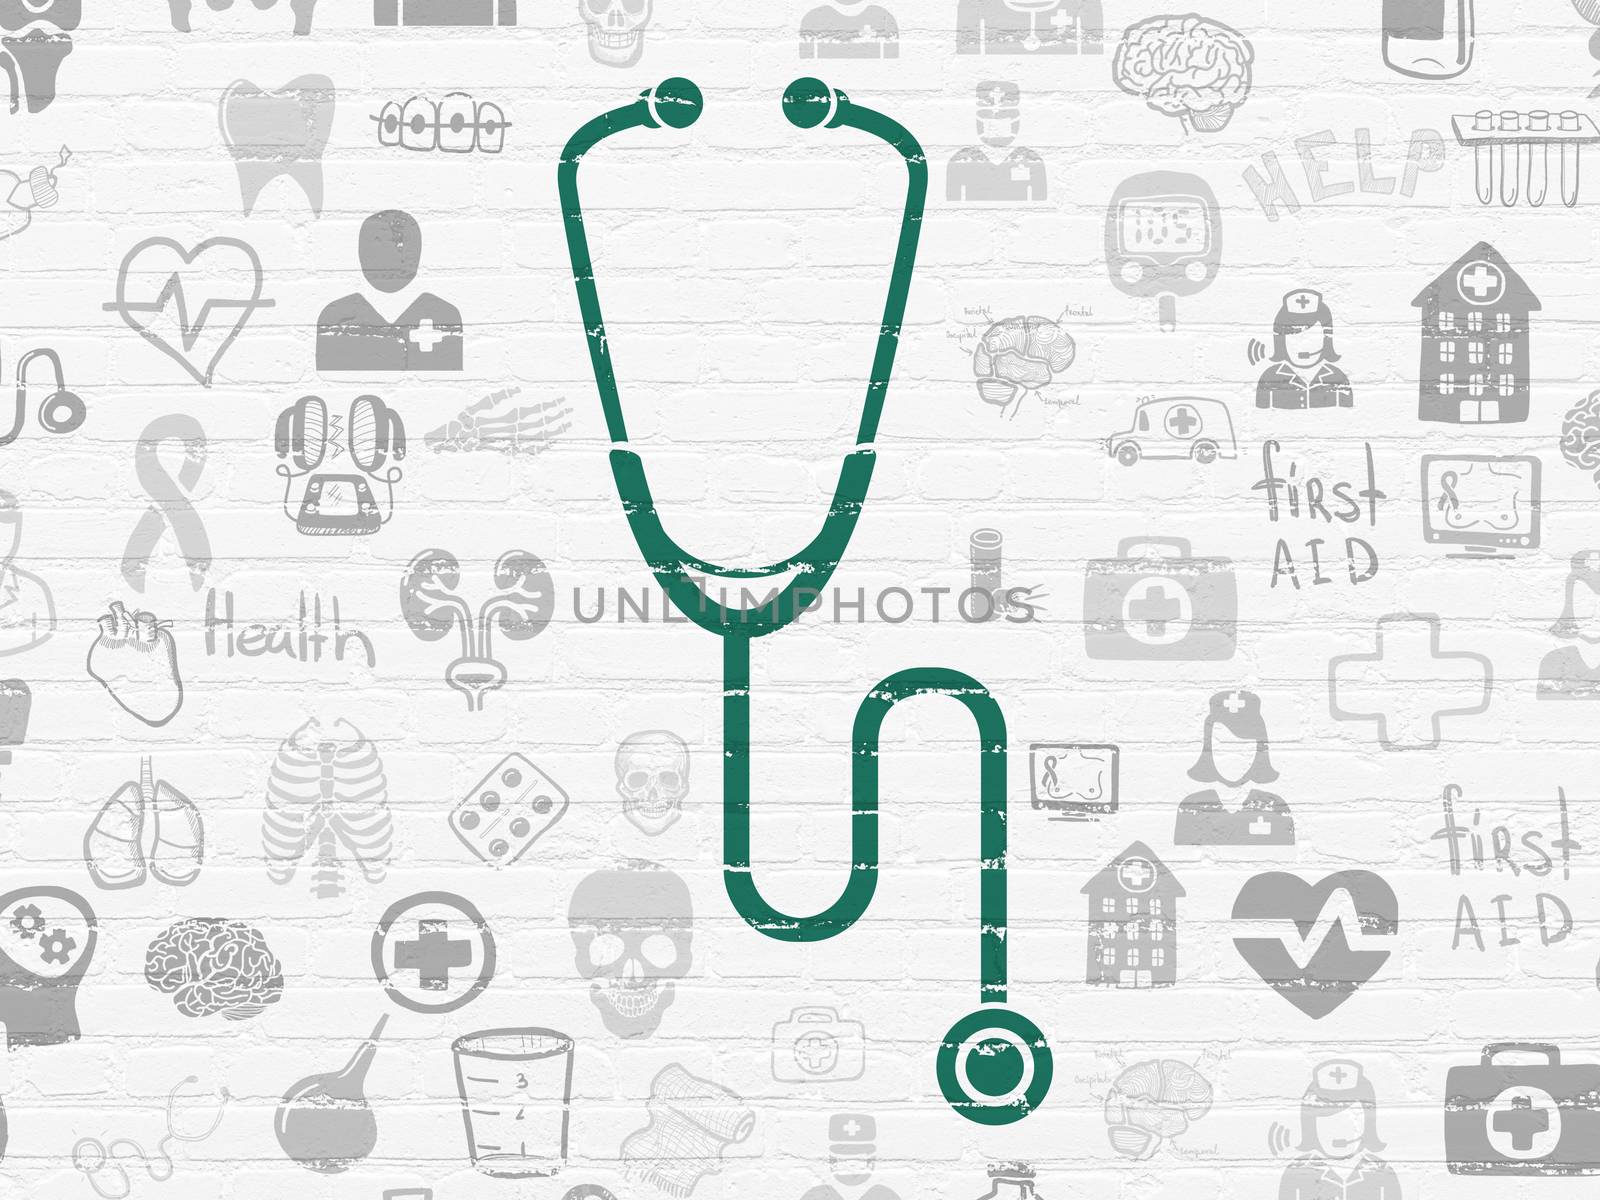 Health concept: Painted green Stethoscope icon on White Brick wall background with  Hand Drawn Medicine Icons